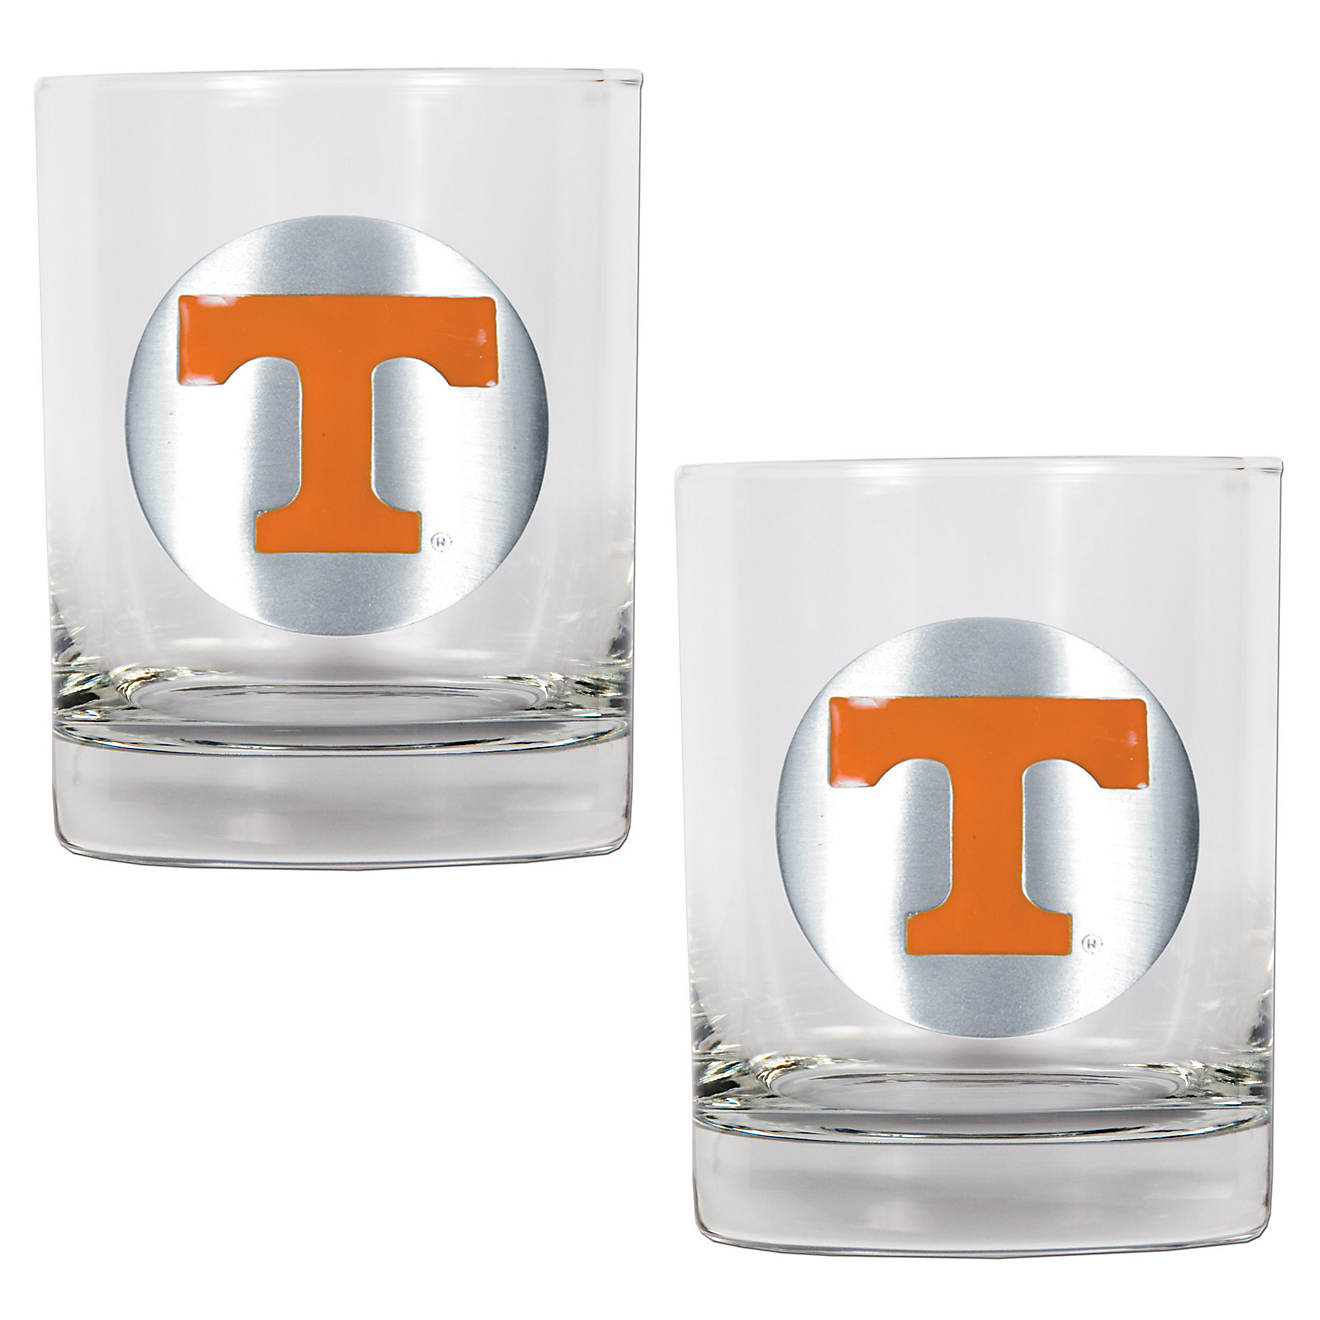 Great American Products NCAA Two Piece Rocks Glass Set